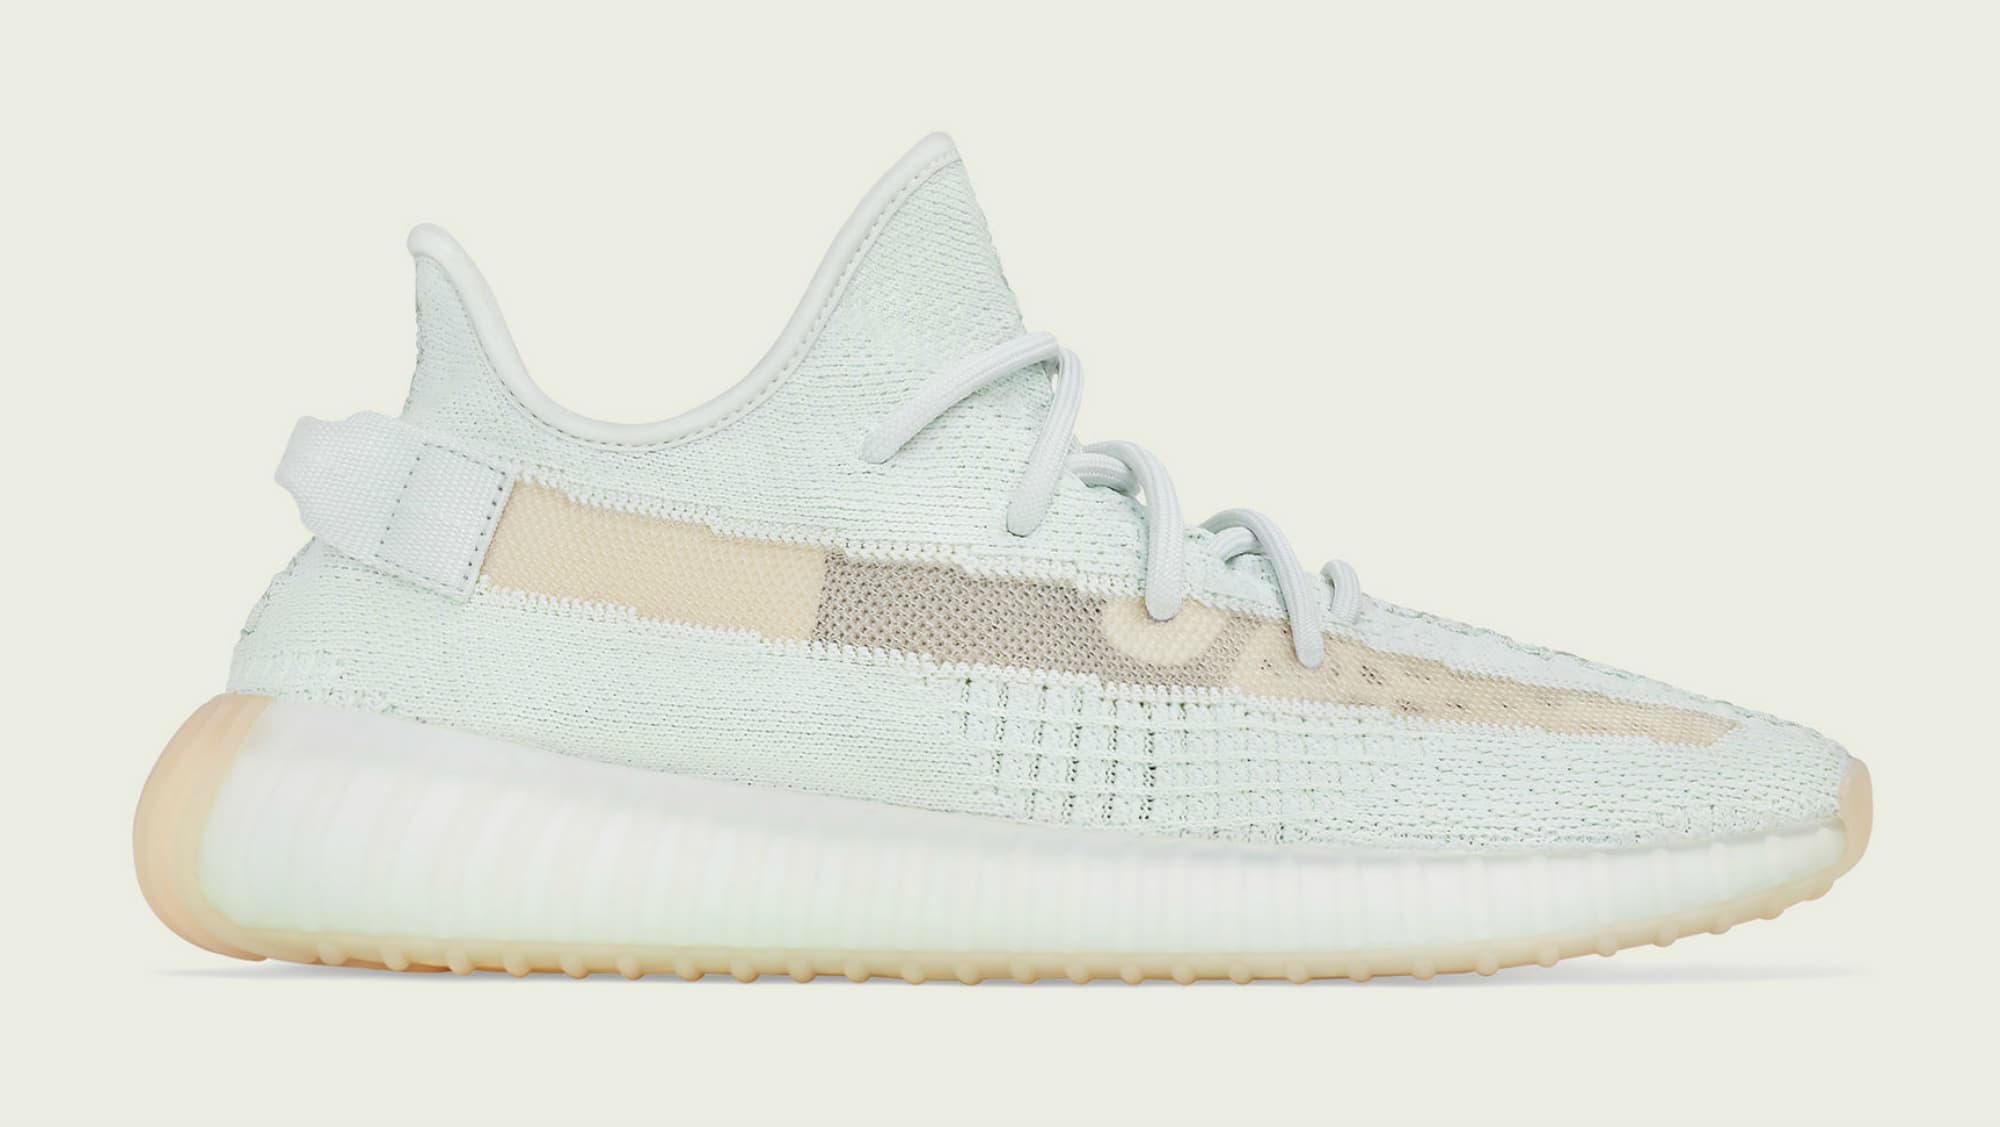 adidas-yeezy-boost-350-v2-hyperspace-eg7491-release-date